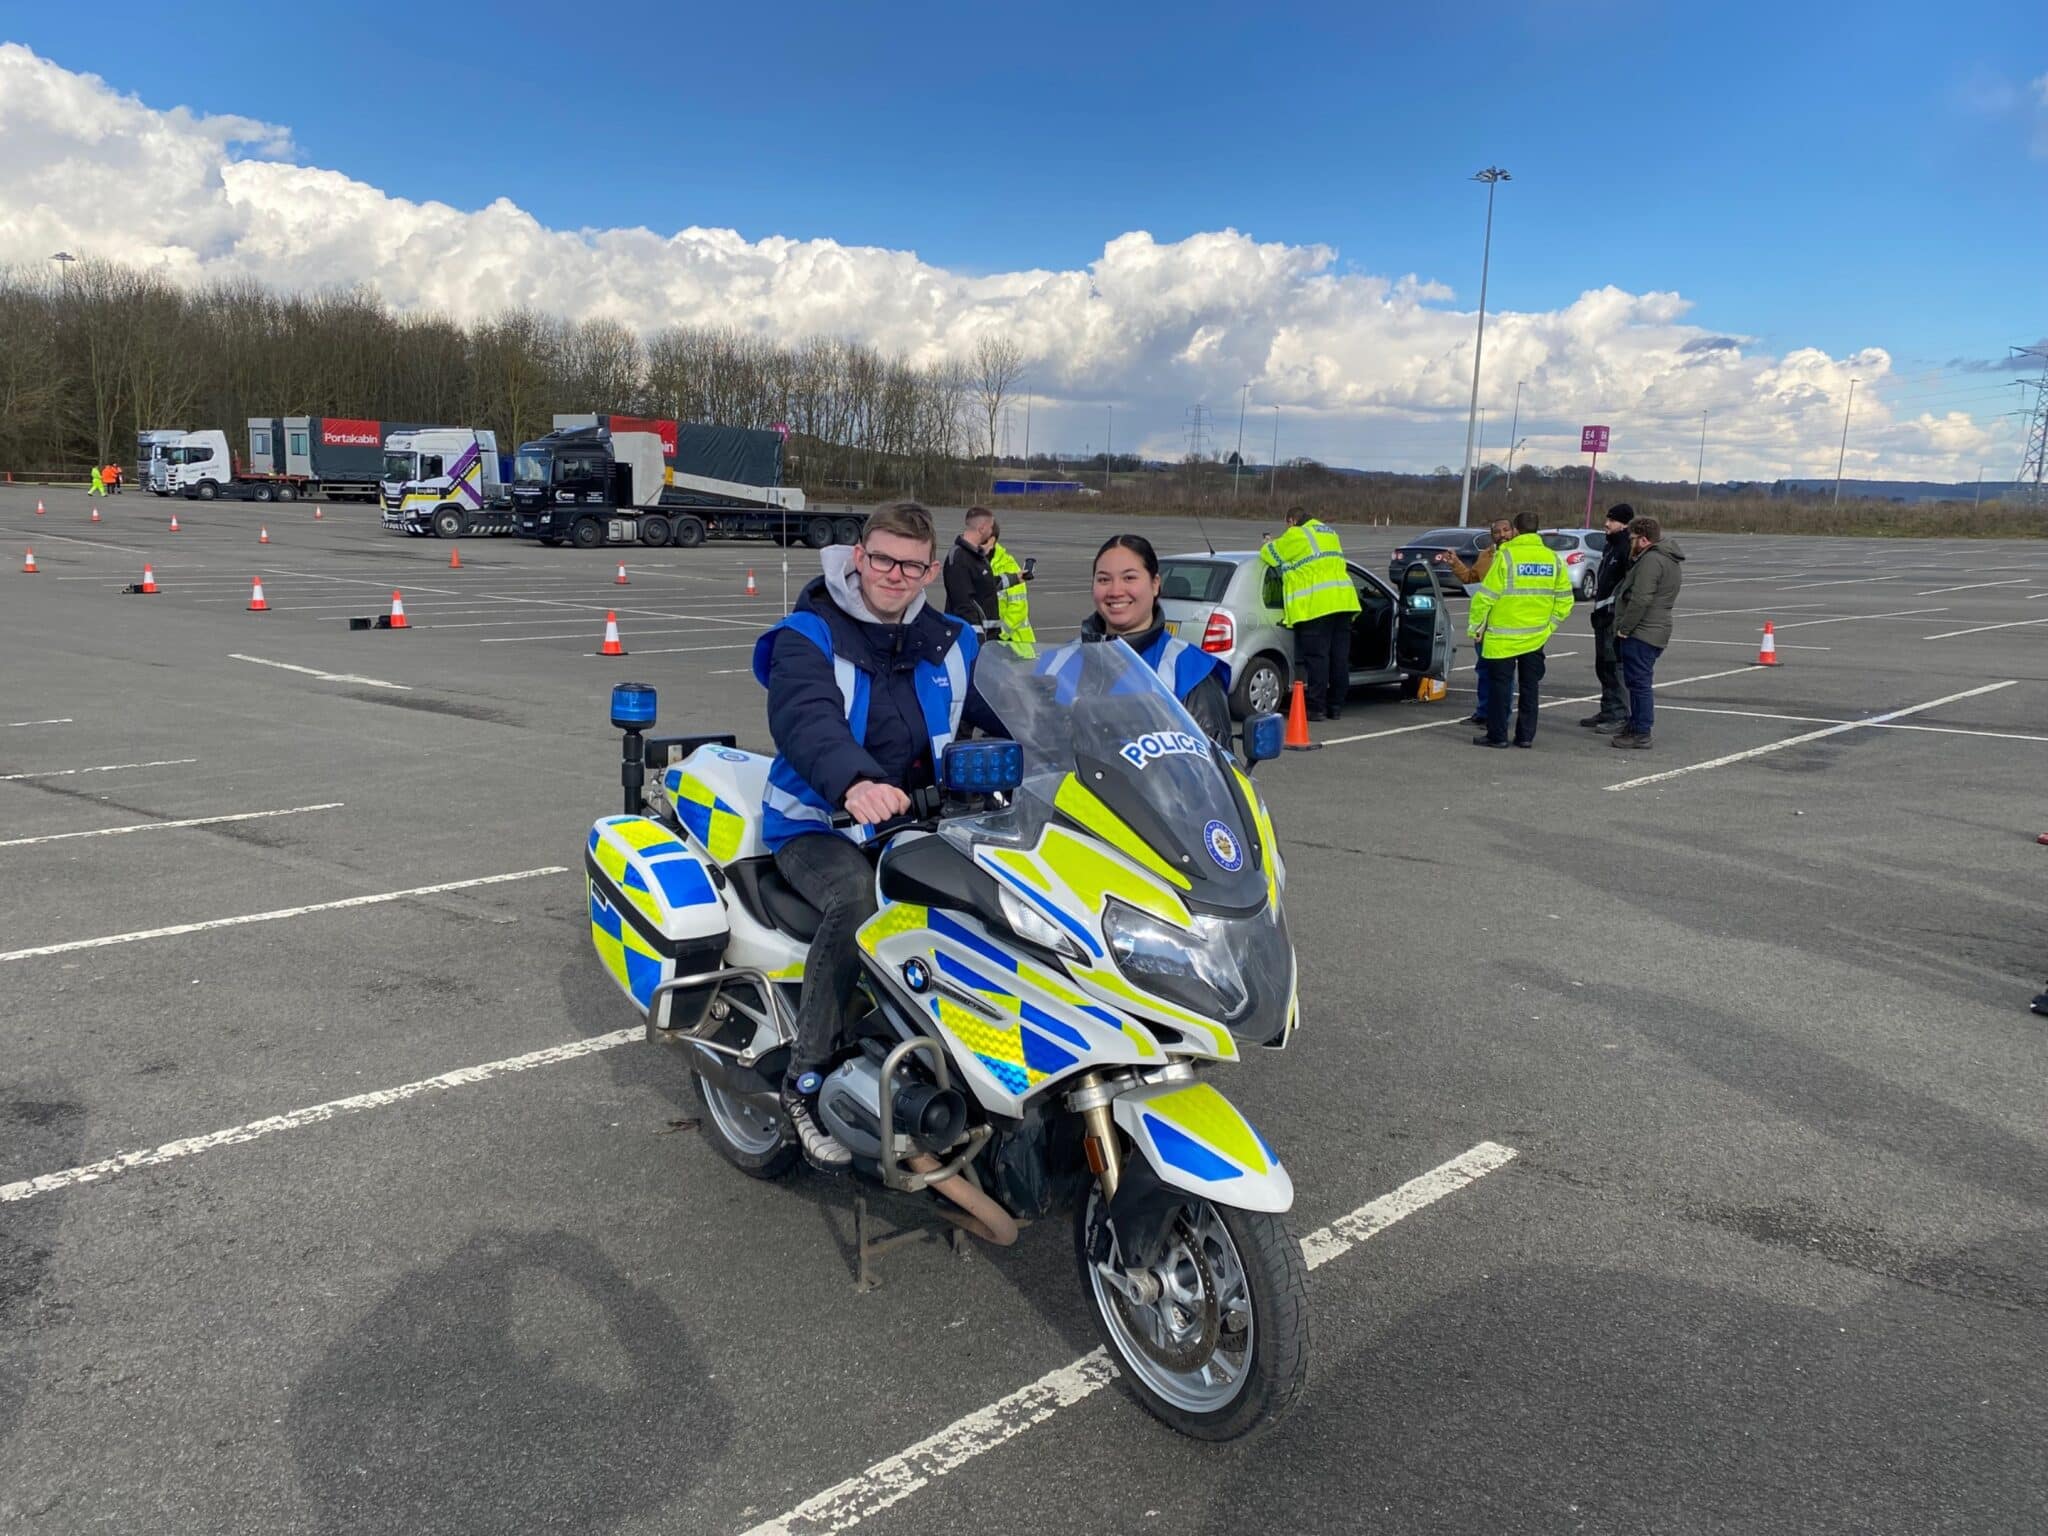 Policing students take part in live operation